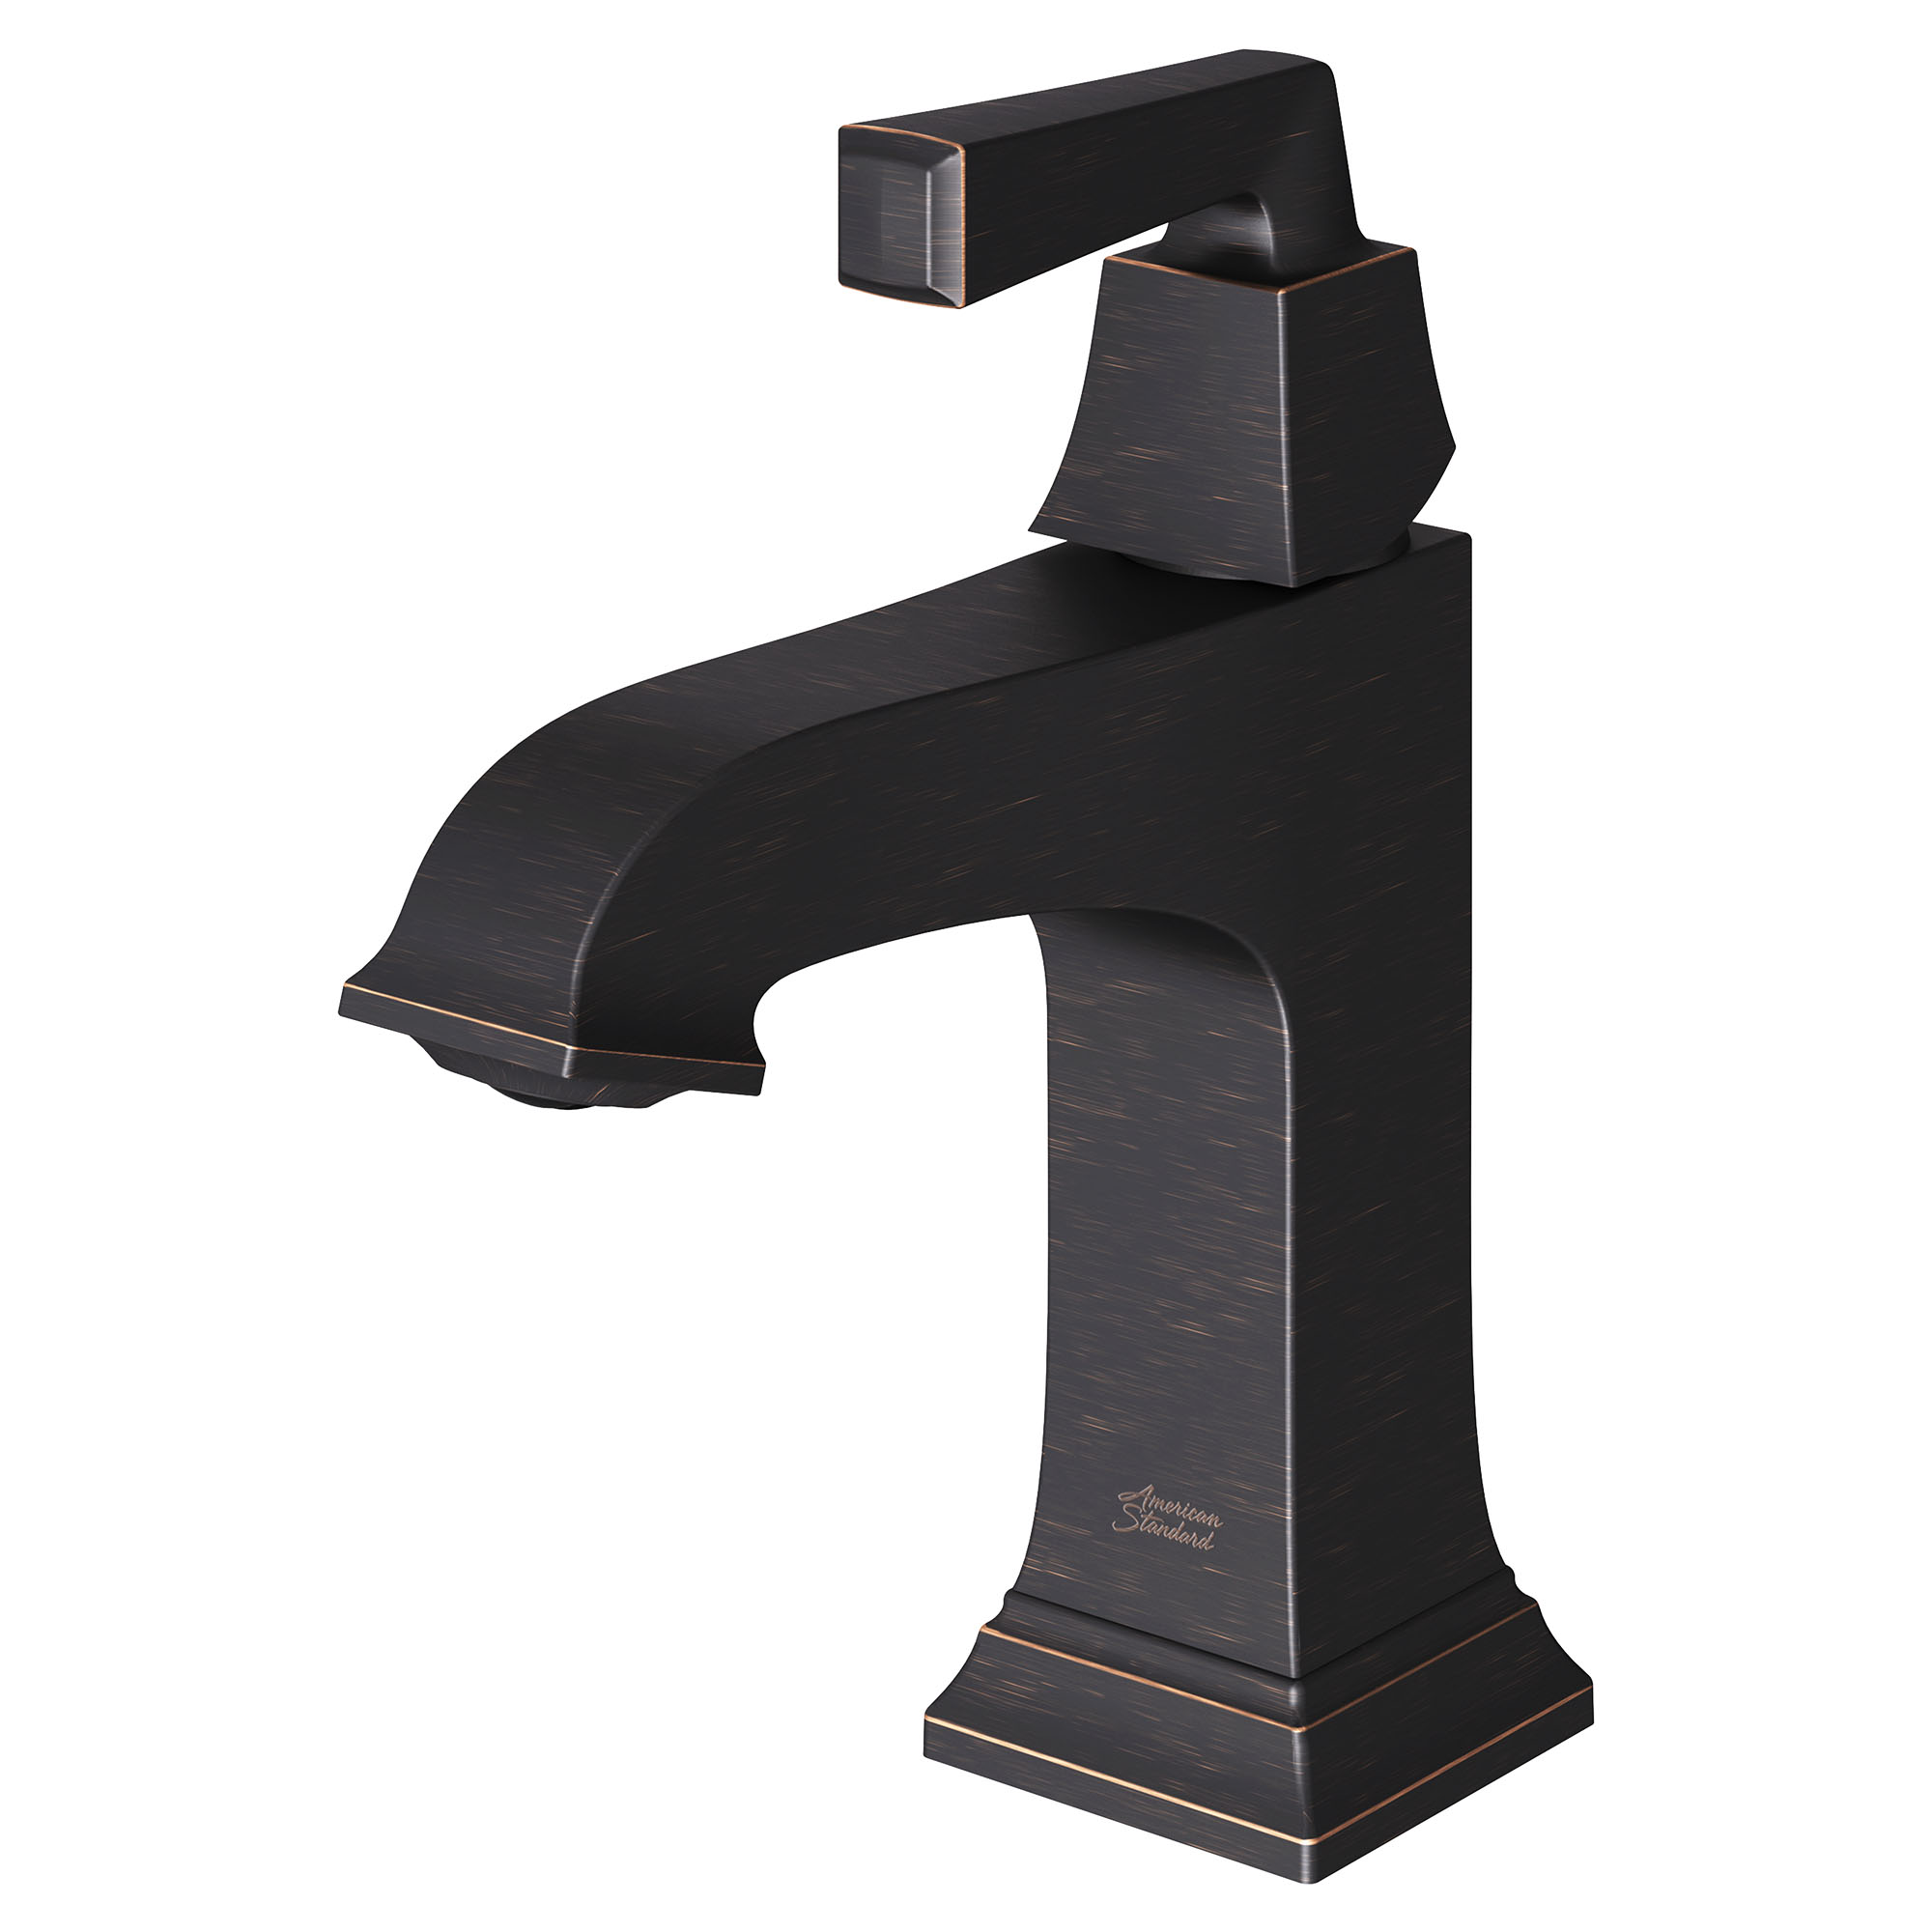 Town Square® S Single Hole Single-Handle Bathroom Faucet 1.2 gpm/4.5 L/min With Lever Handle